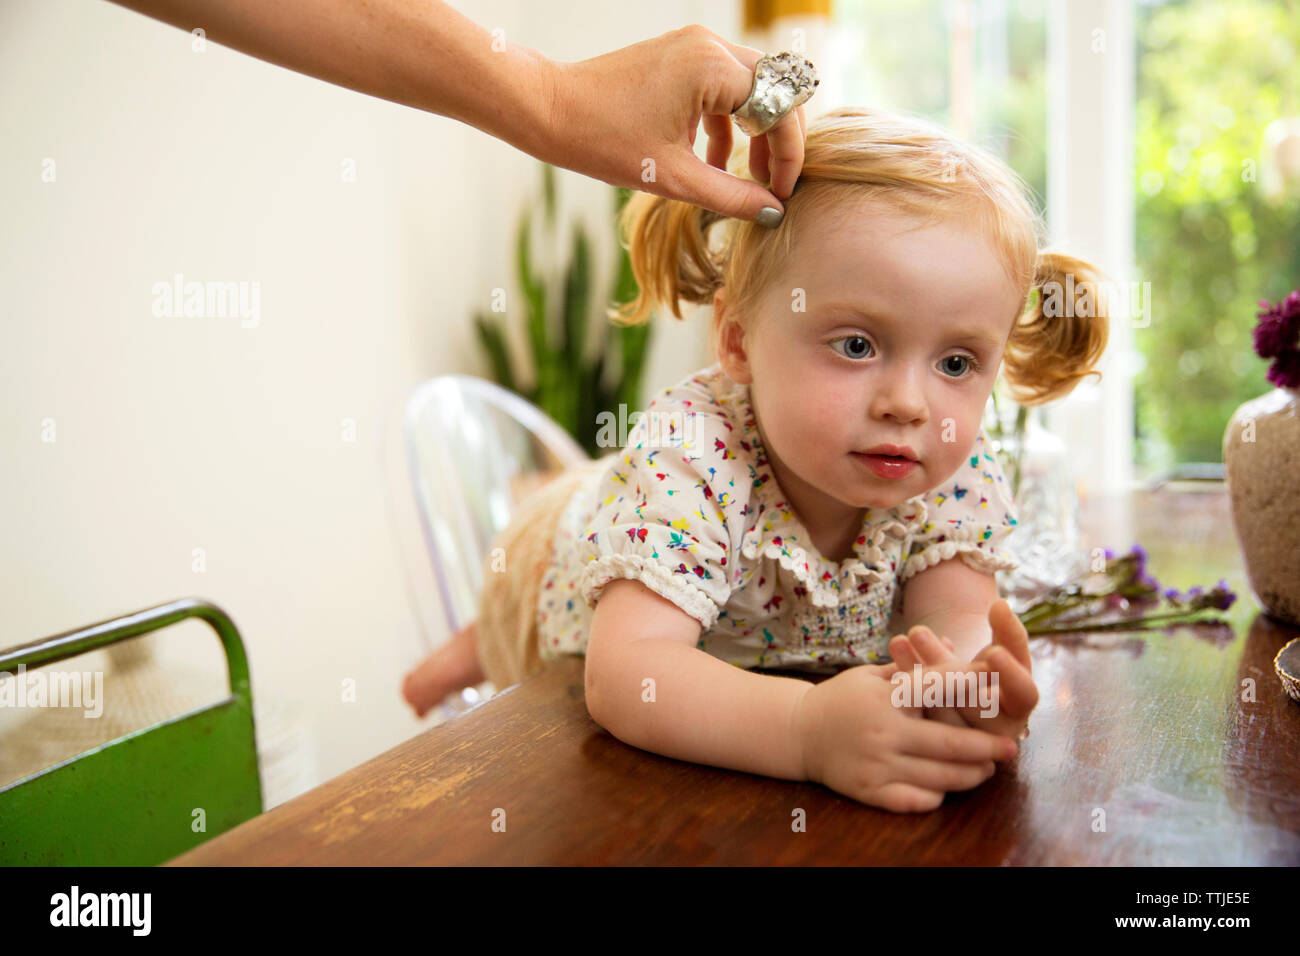 Cropped image of hand adjusting baby girl's hair at home Stock Photo